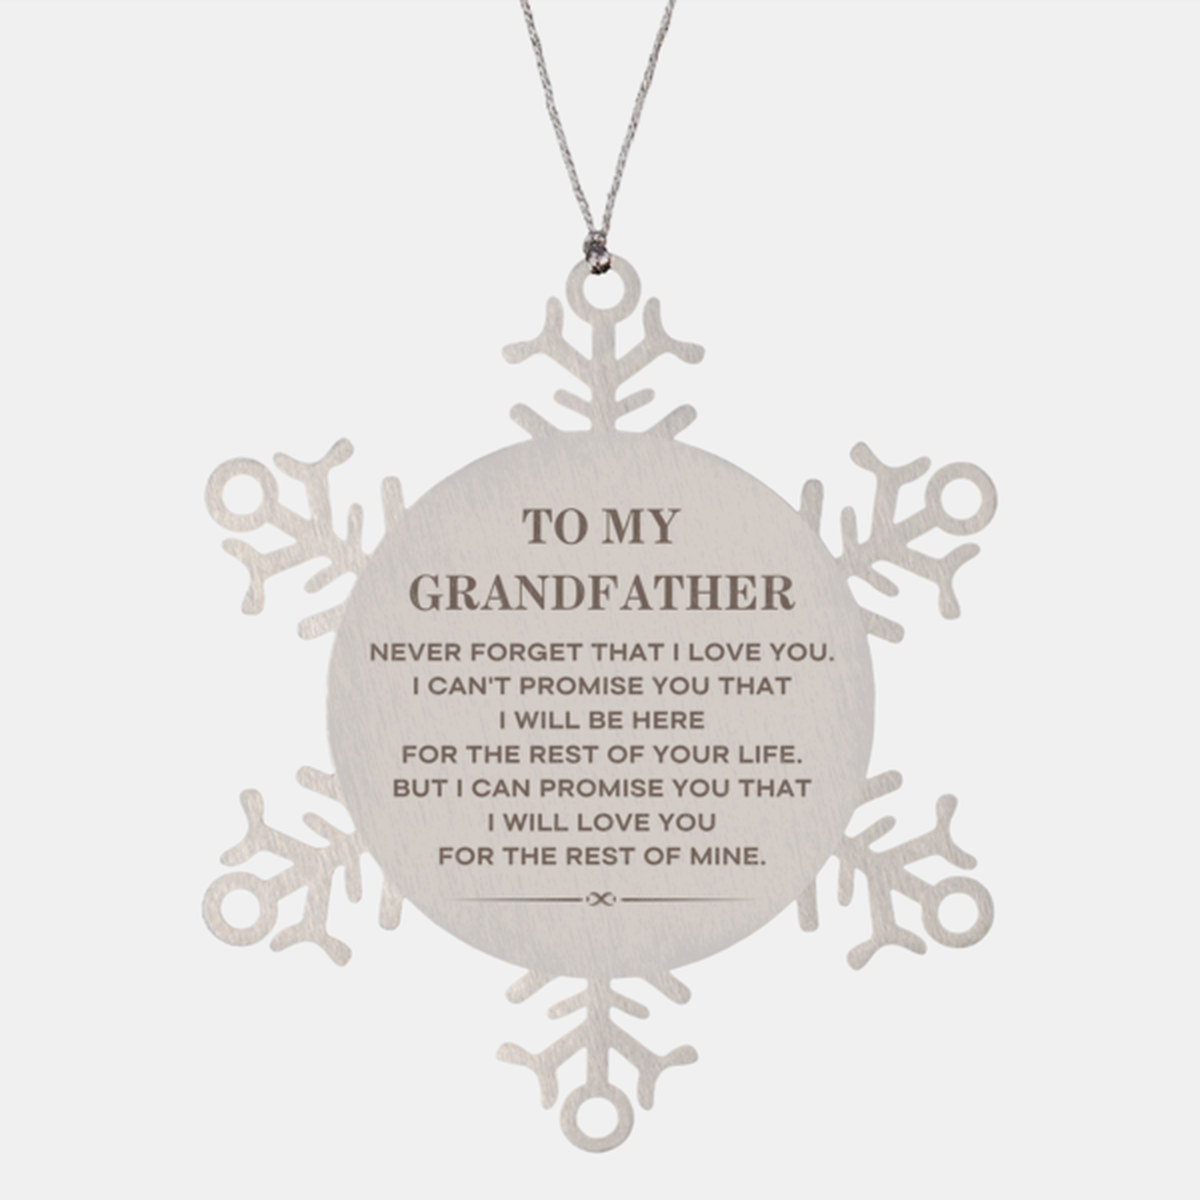 To My Grandfather Gifts, I will love you for the rest of mine, Love Grandfather Ornament, Birthday Christmas Unique Snowflake Ornament For Grandfather